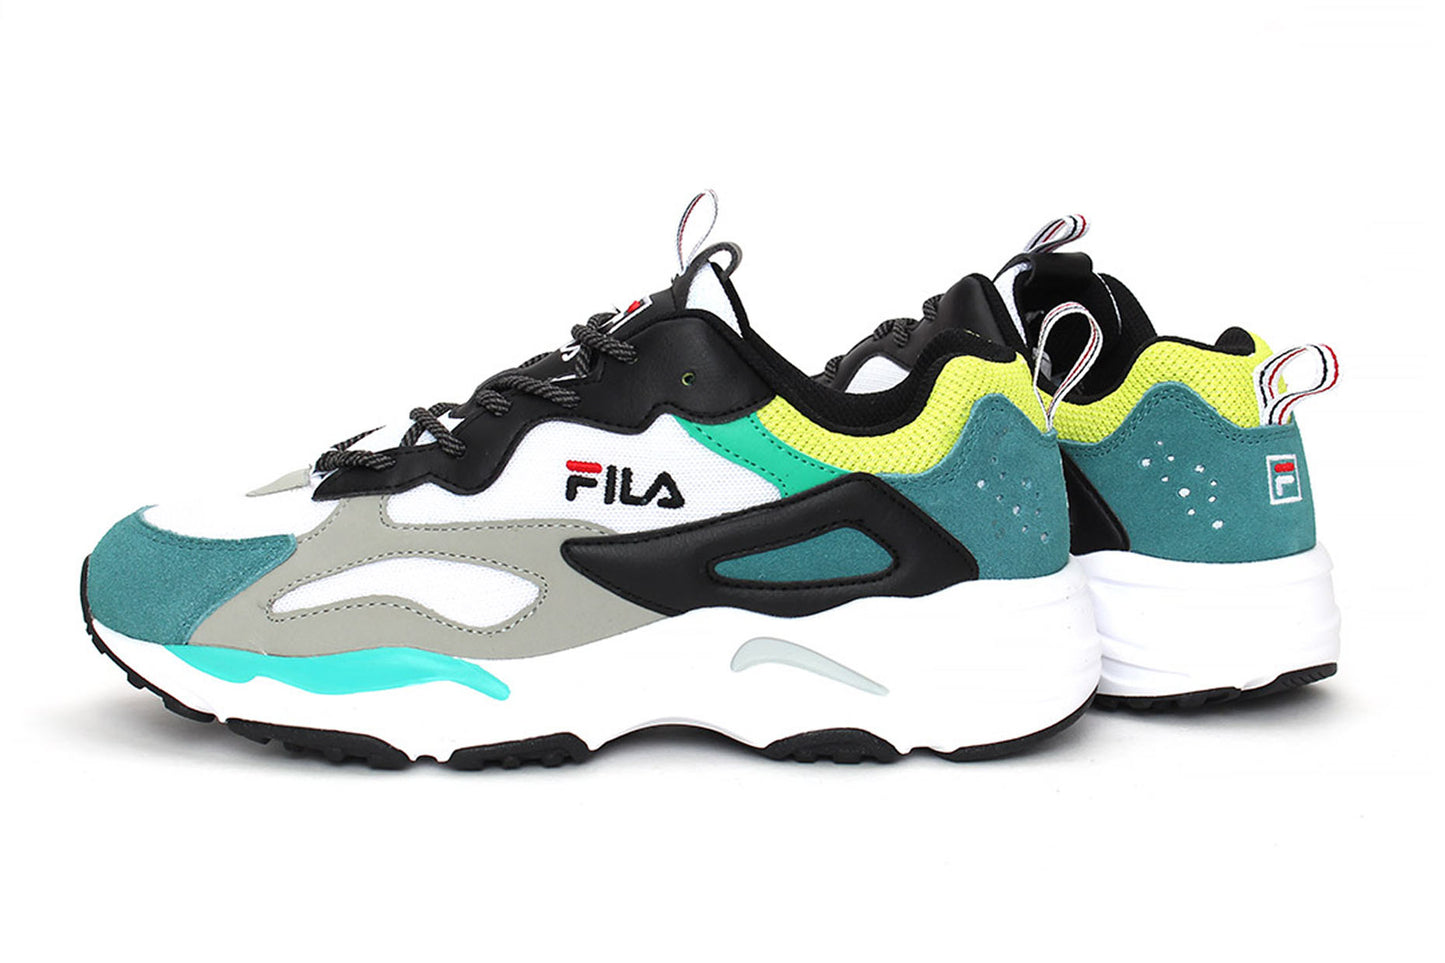 FILA MEN'S SHOES WITH HIGH PREFORMED SOLE